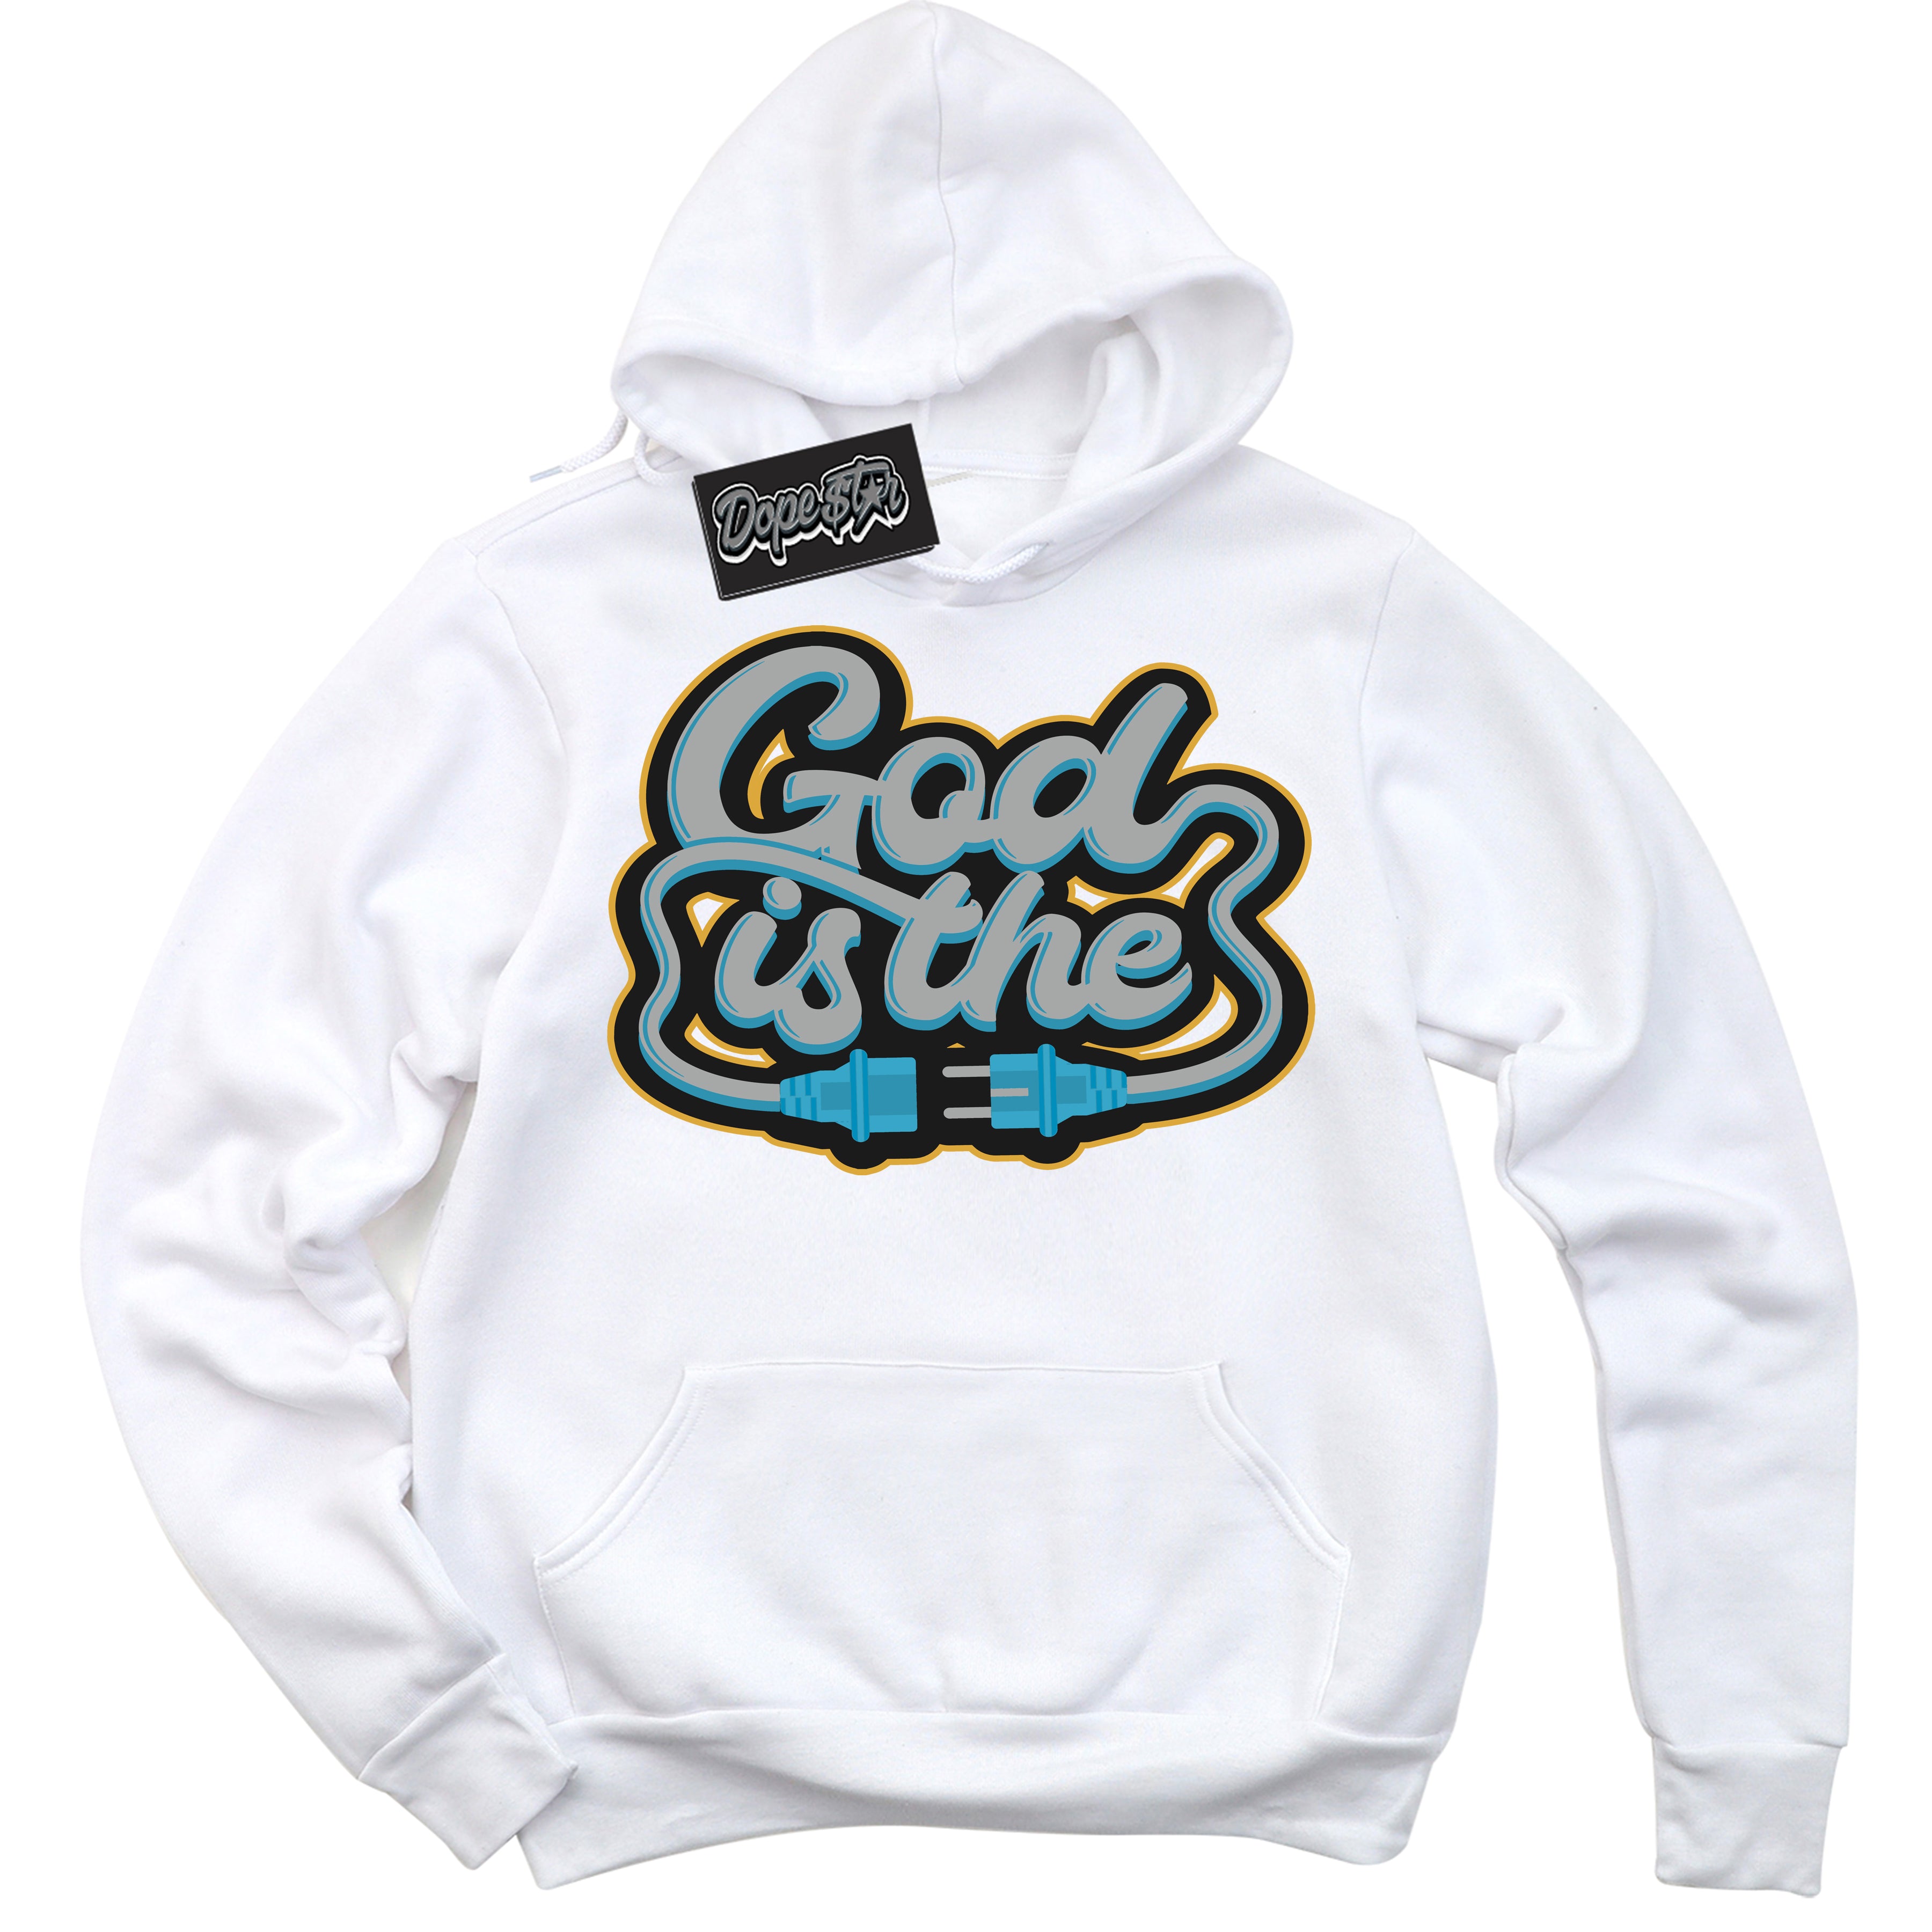 Cool White Hoodie with “ God Is The ”  design that Perfectly Matches Aqua 5s Sneakers.